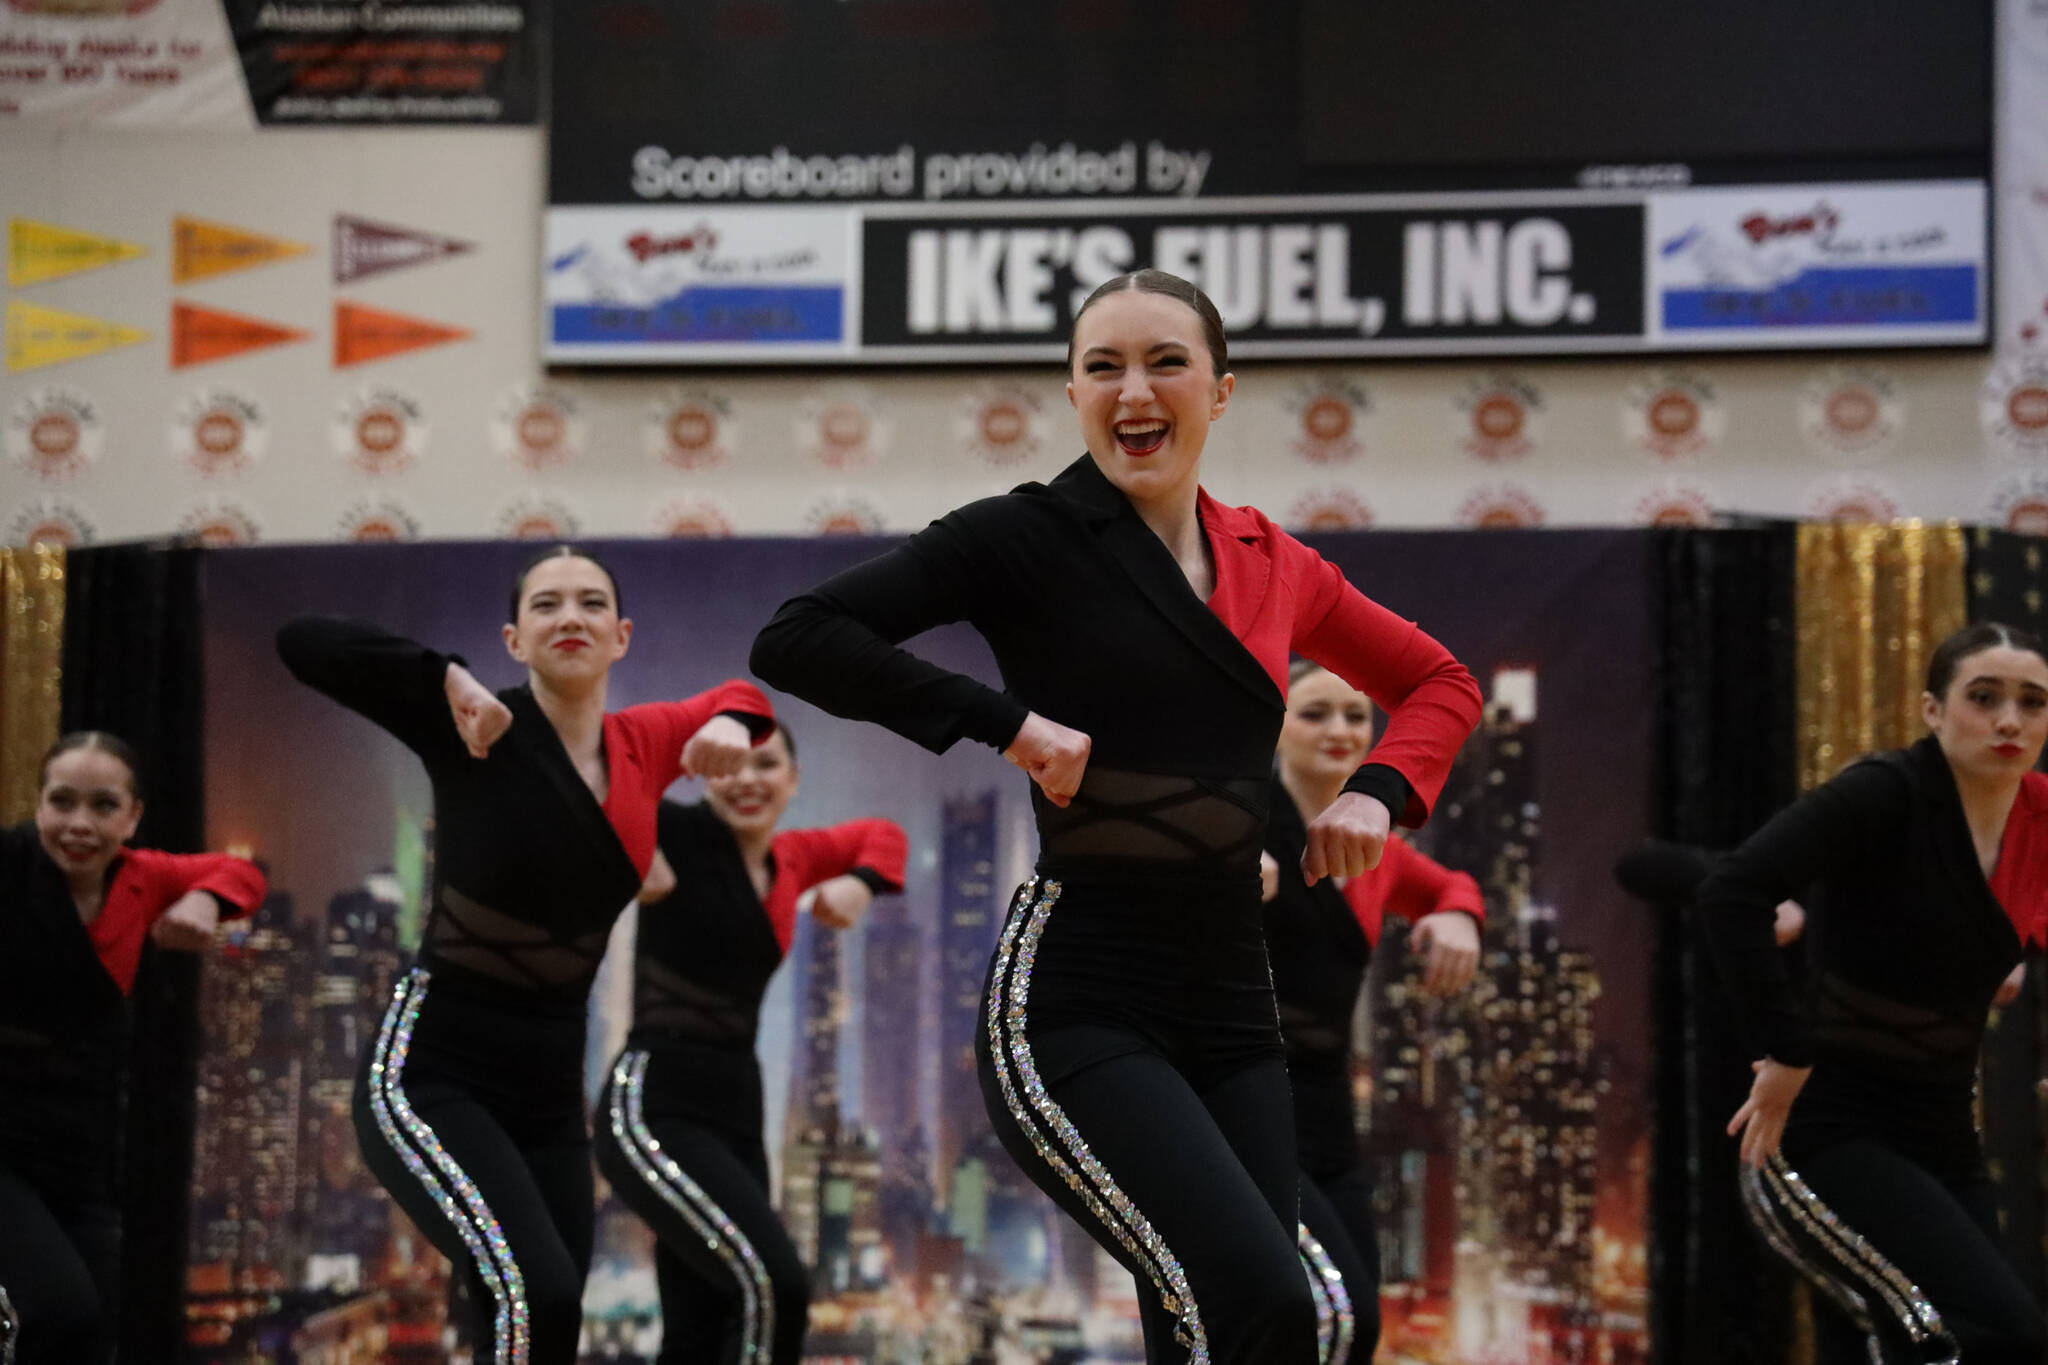 JDHS dance team member’s give it their all during their Hollywood themed performance during the annual Region V 2A/4A dance adjudication competition hosted at Juneau-Douglas High School:Yadaa.at Kalé Saturday afternoon. (Clarise Larson / Juneau Empire)